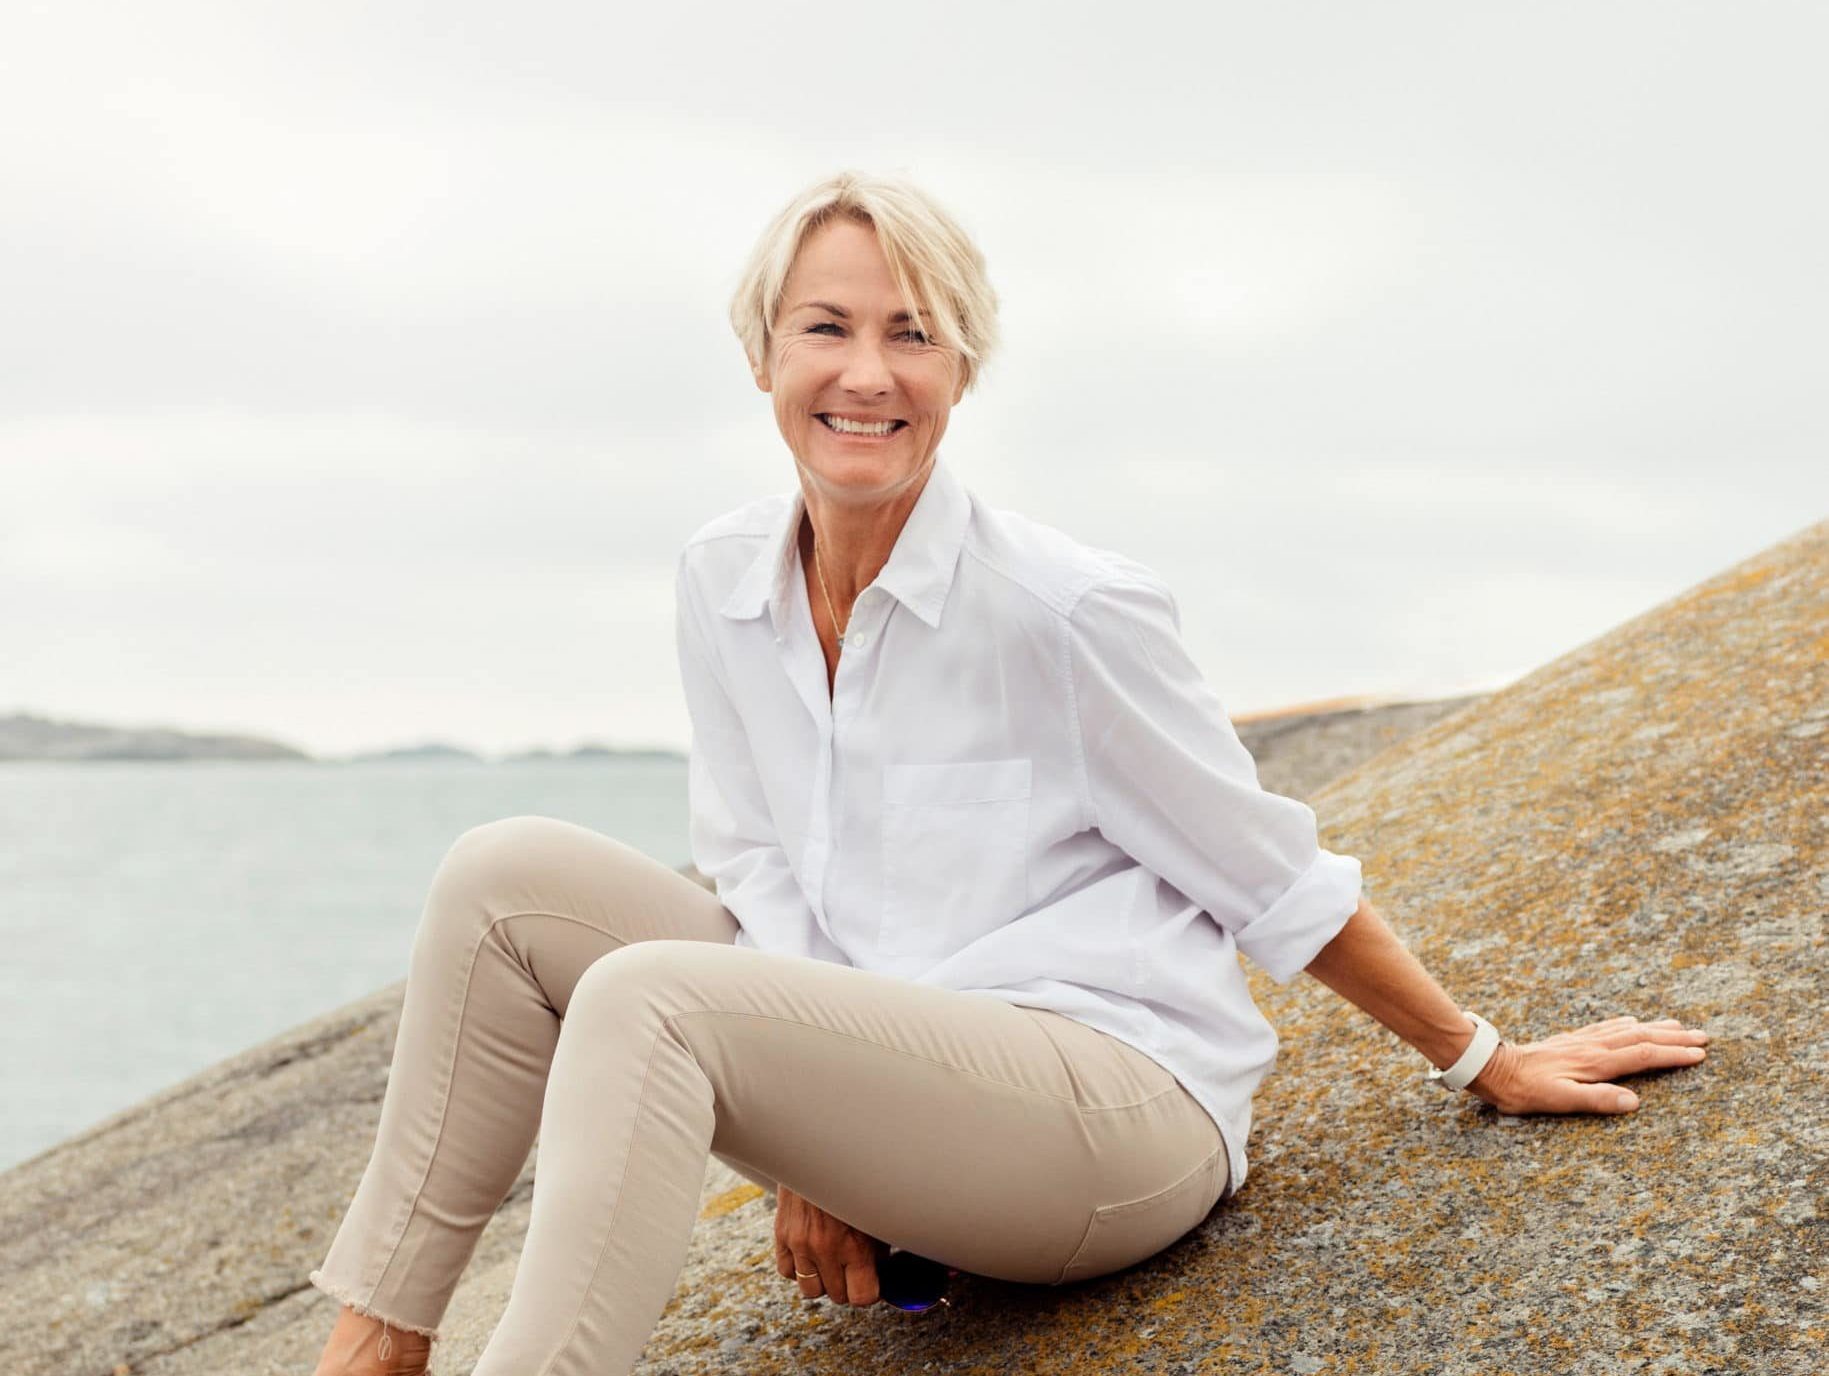 Elisabeth Grieg, the Chair of the board at Grieg, sitting on a rock by the ocean.